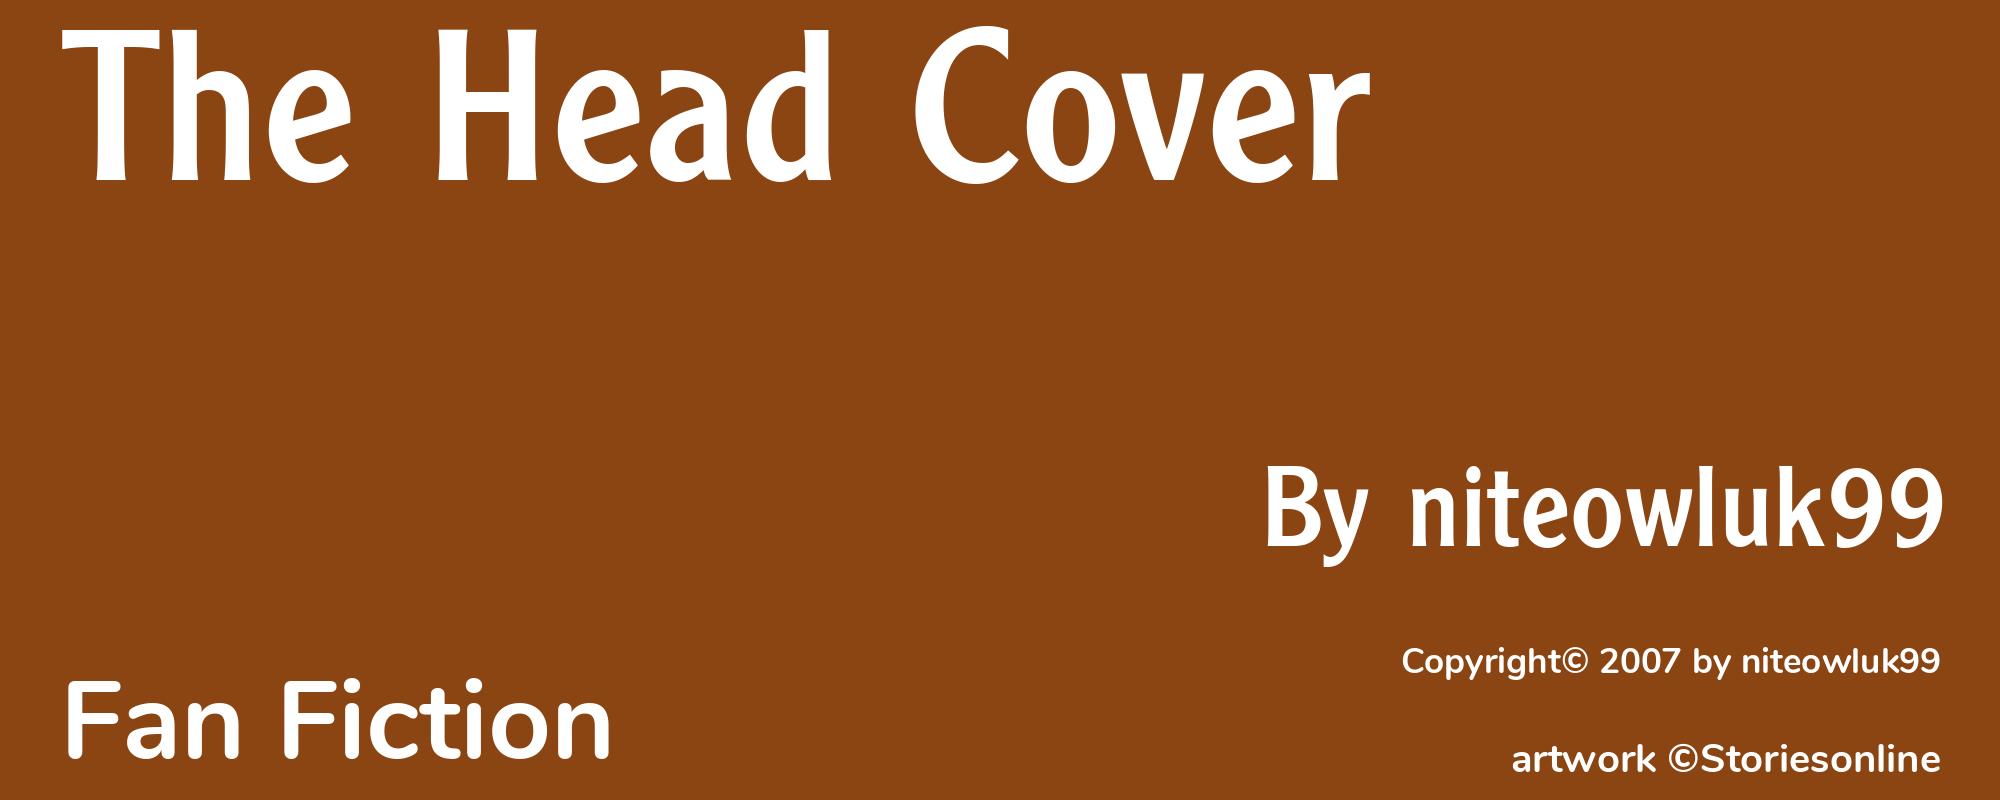 The Head Cover - Cover